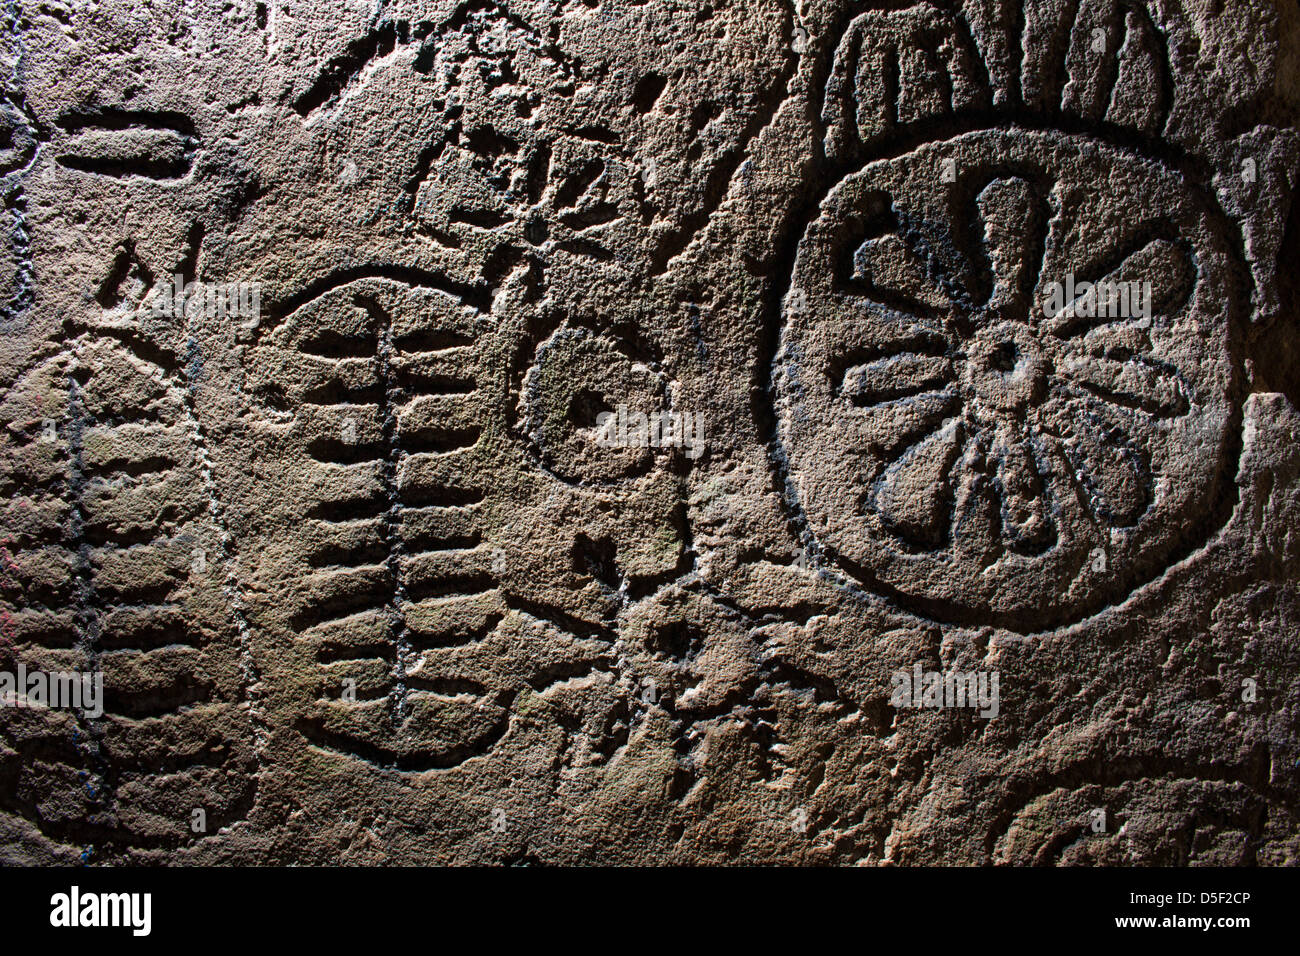 Megalithic petroglyphs ( rock engravings ) in the Loughcrew passage tomb, County Meath, Ireland. Stock Photo